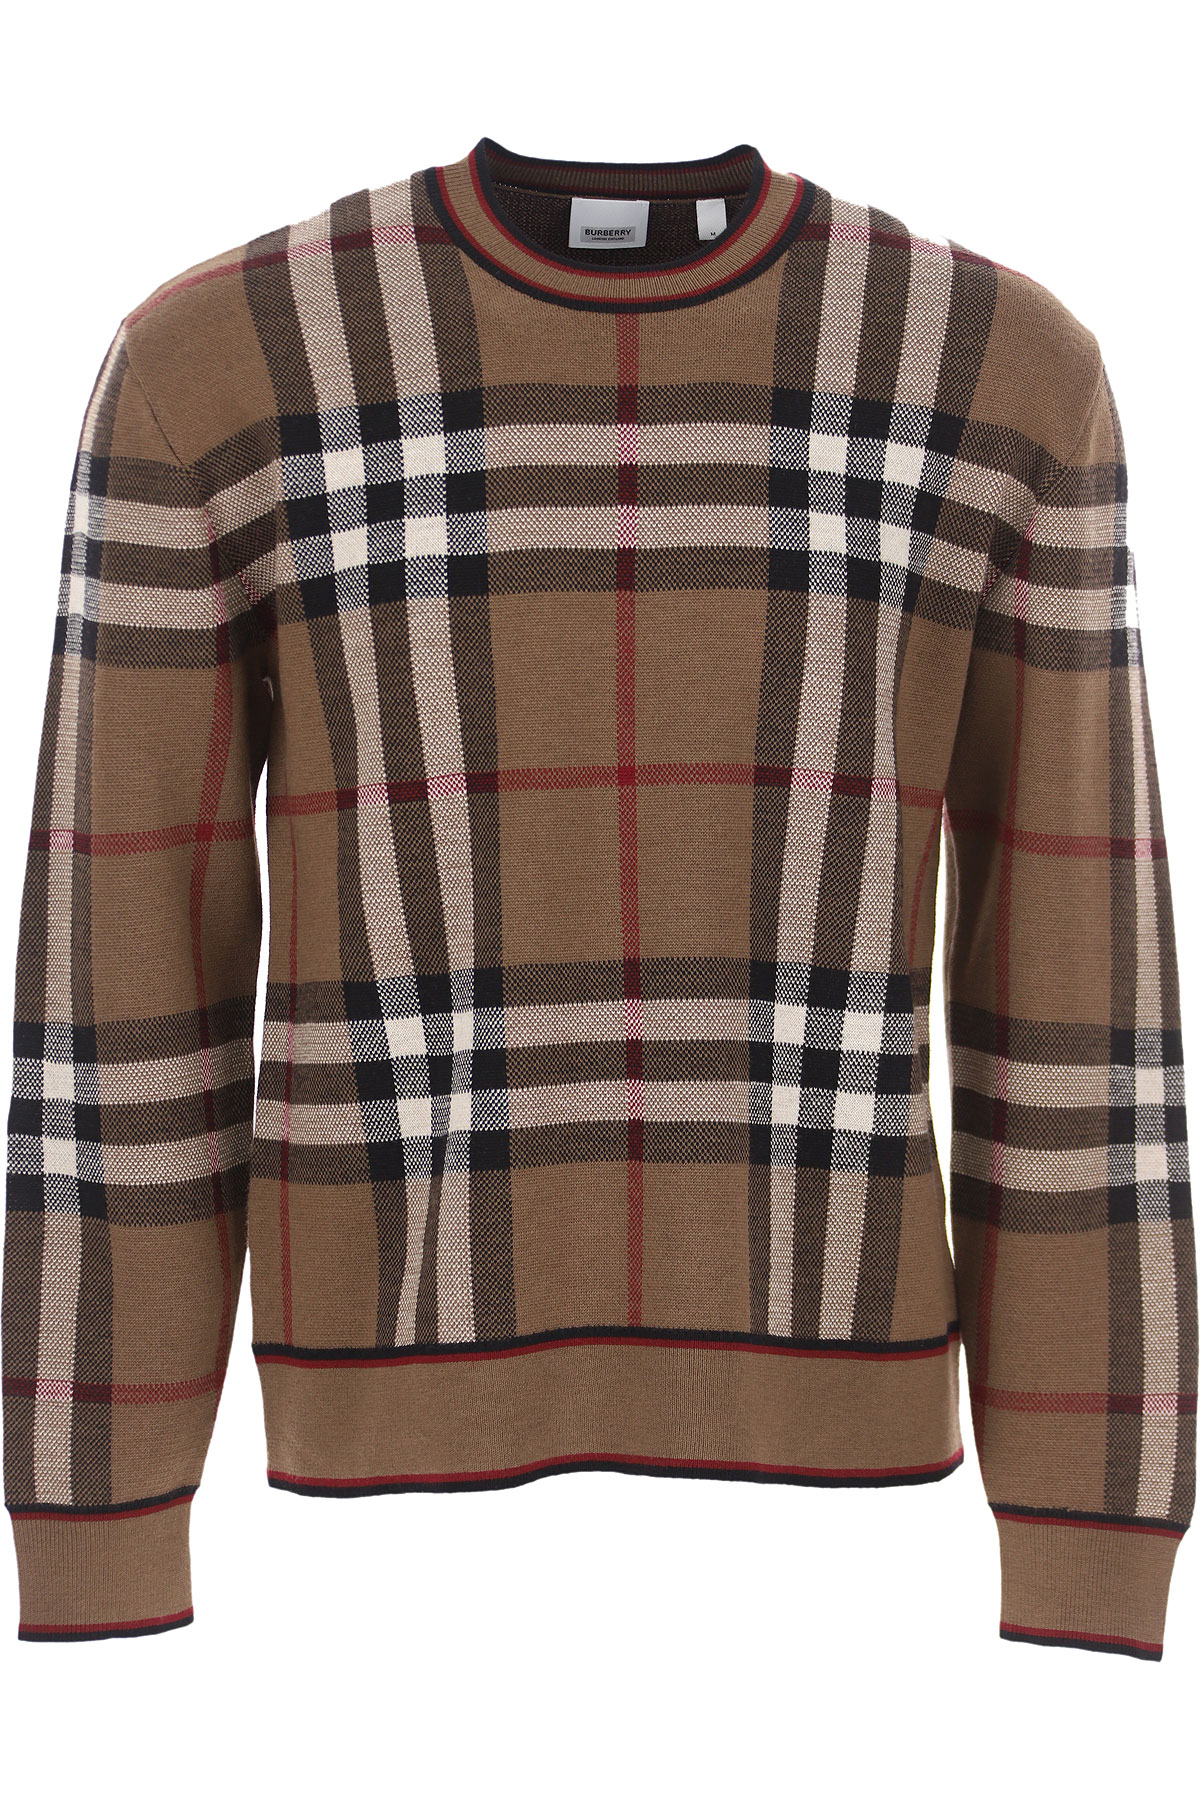 Mens Clothing Burberry, Style code: 8036603-a8773-